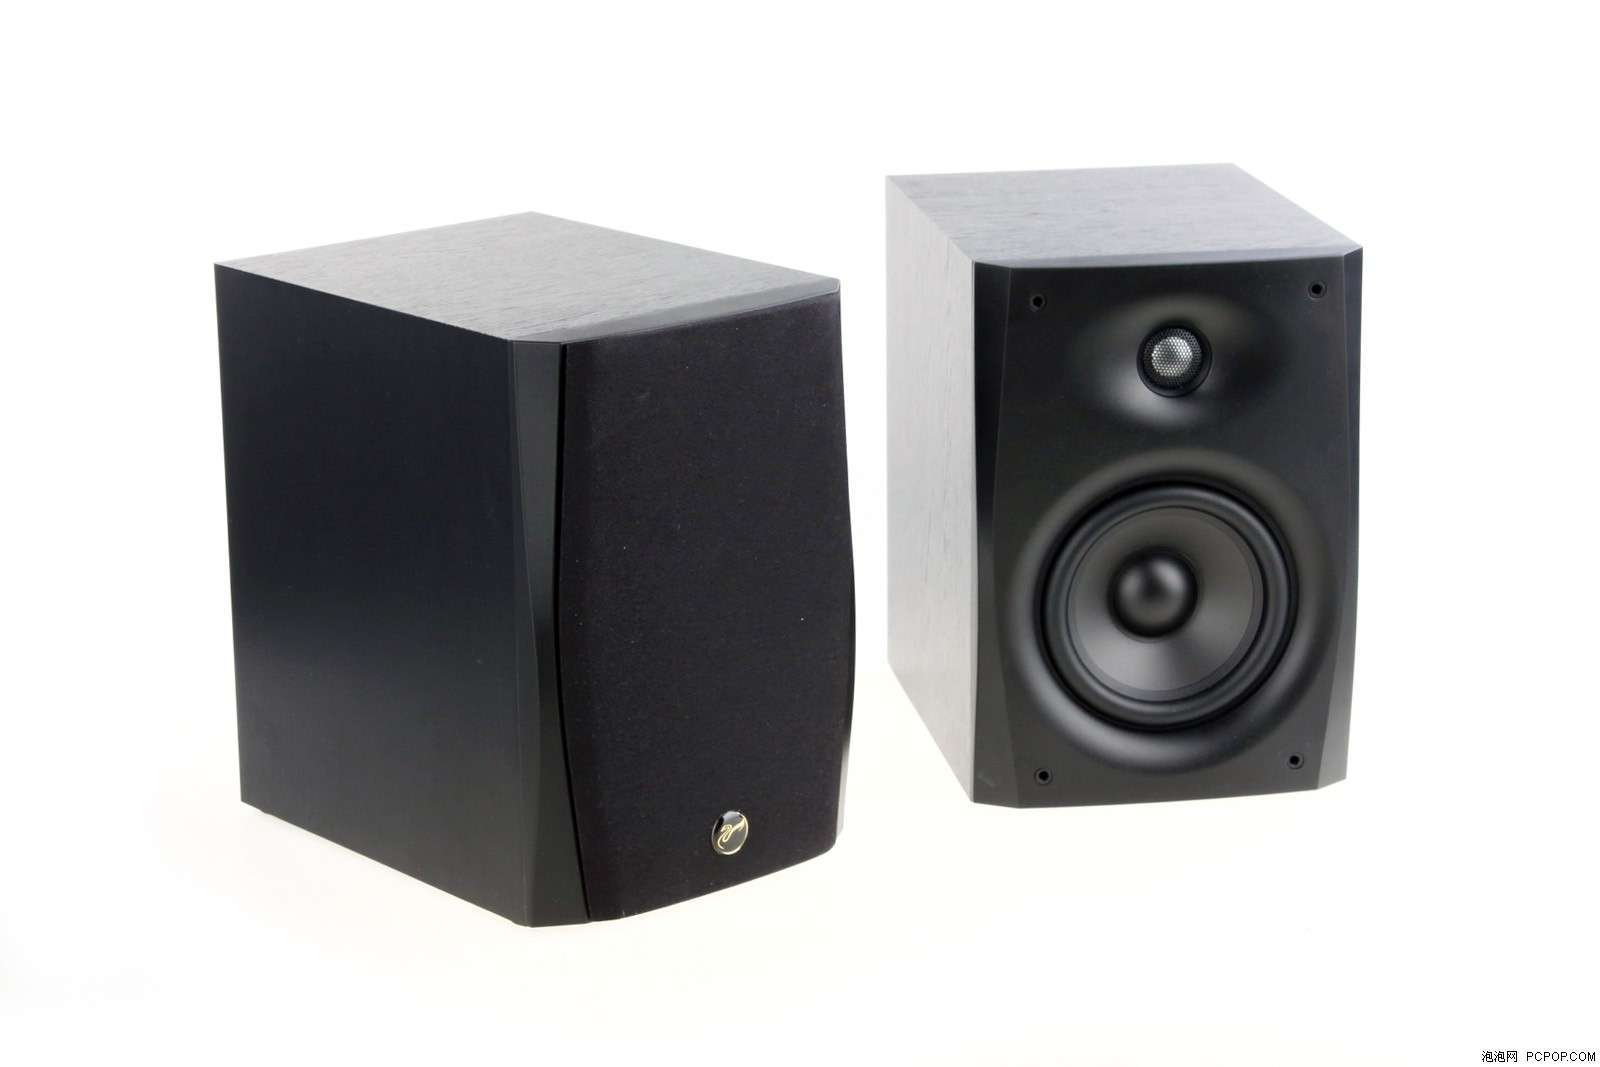 Buy Swans D1080-IV 2.0 Bookshelf Speakers at HiFiNage in India with warranty.